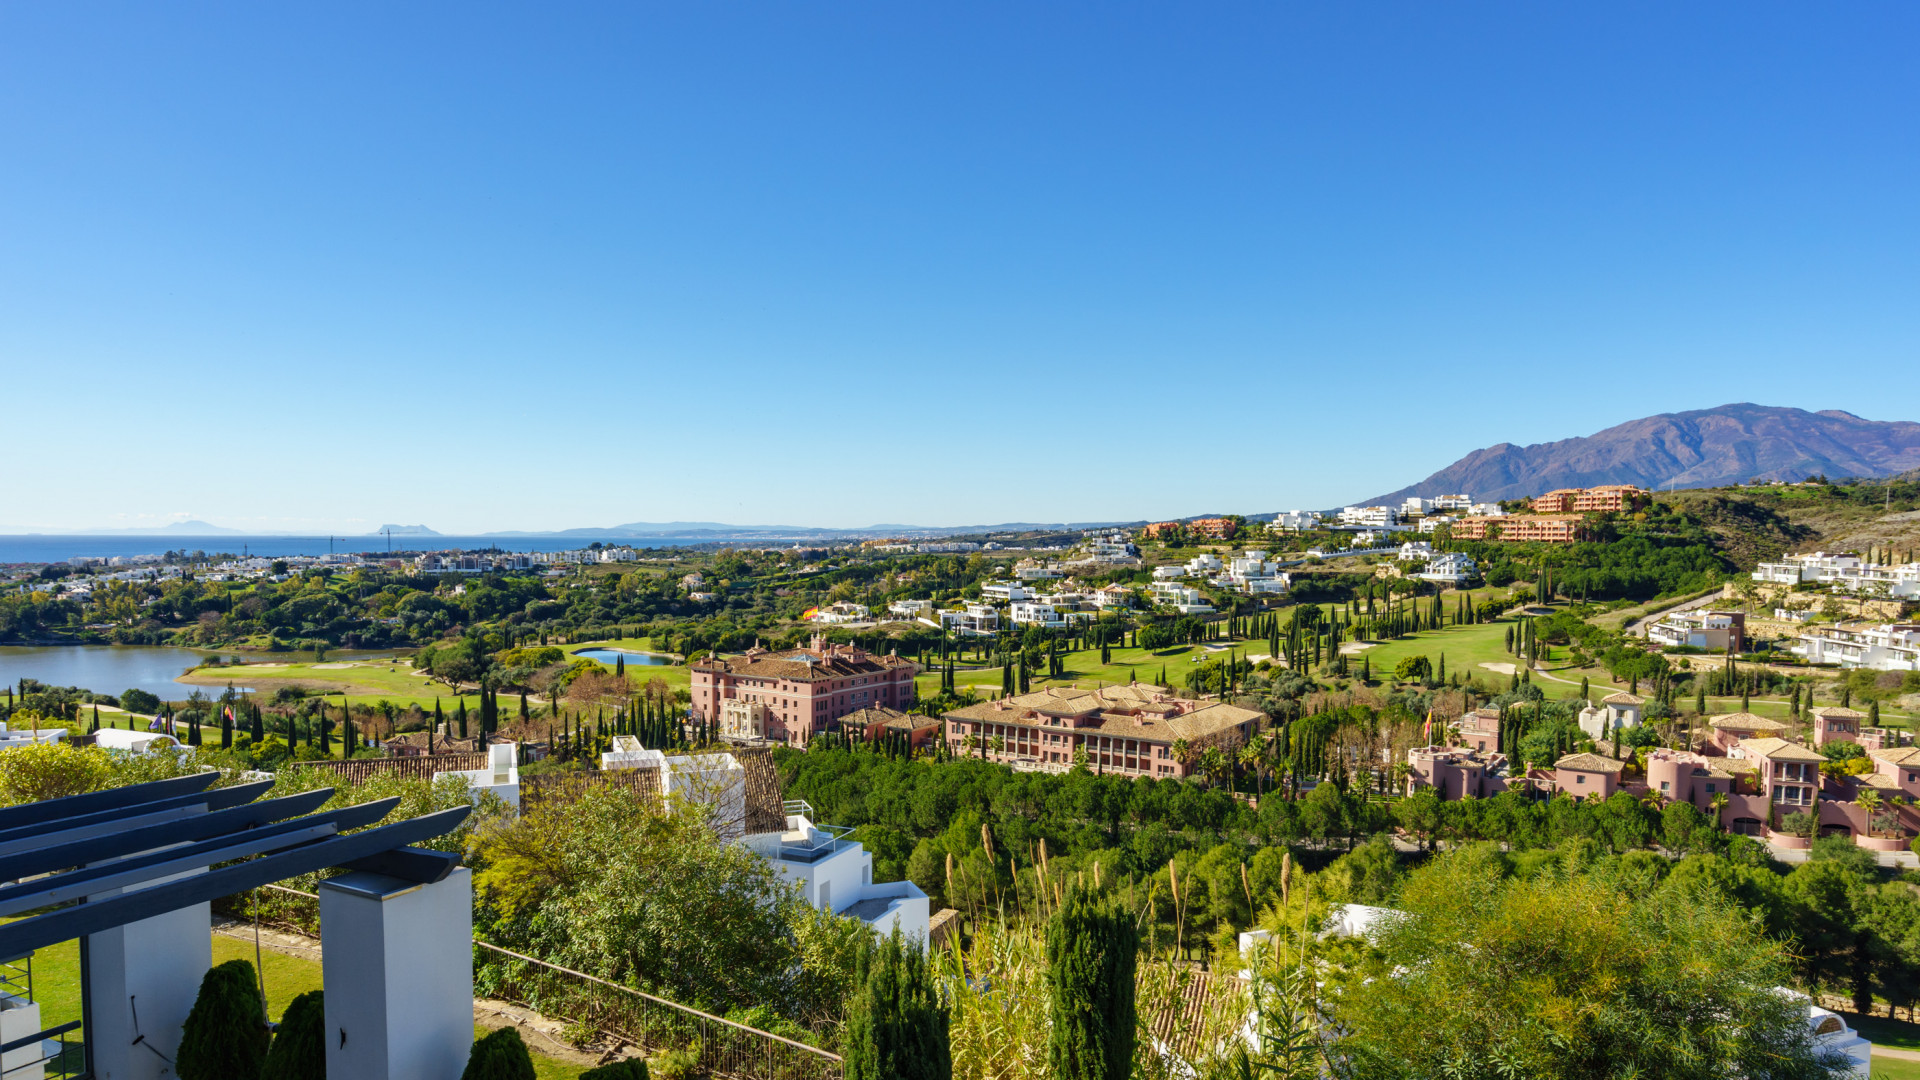 Lovely apartment with panoramic views over the coast, the Mediterranean and the mountains in Acosta Los Flamingos